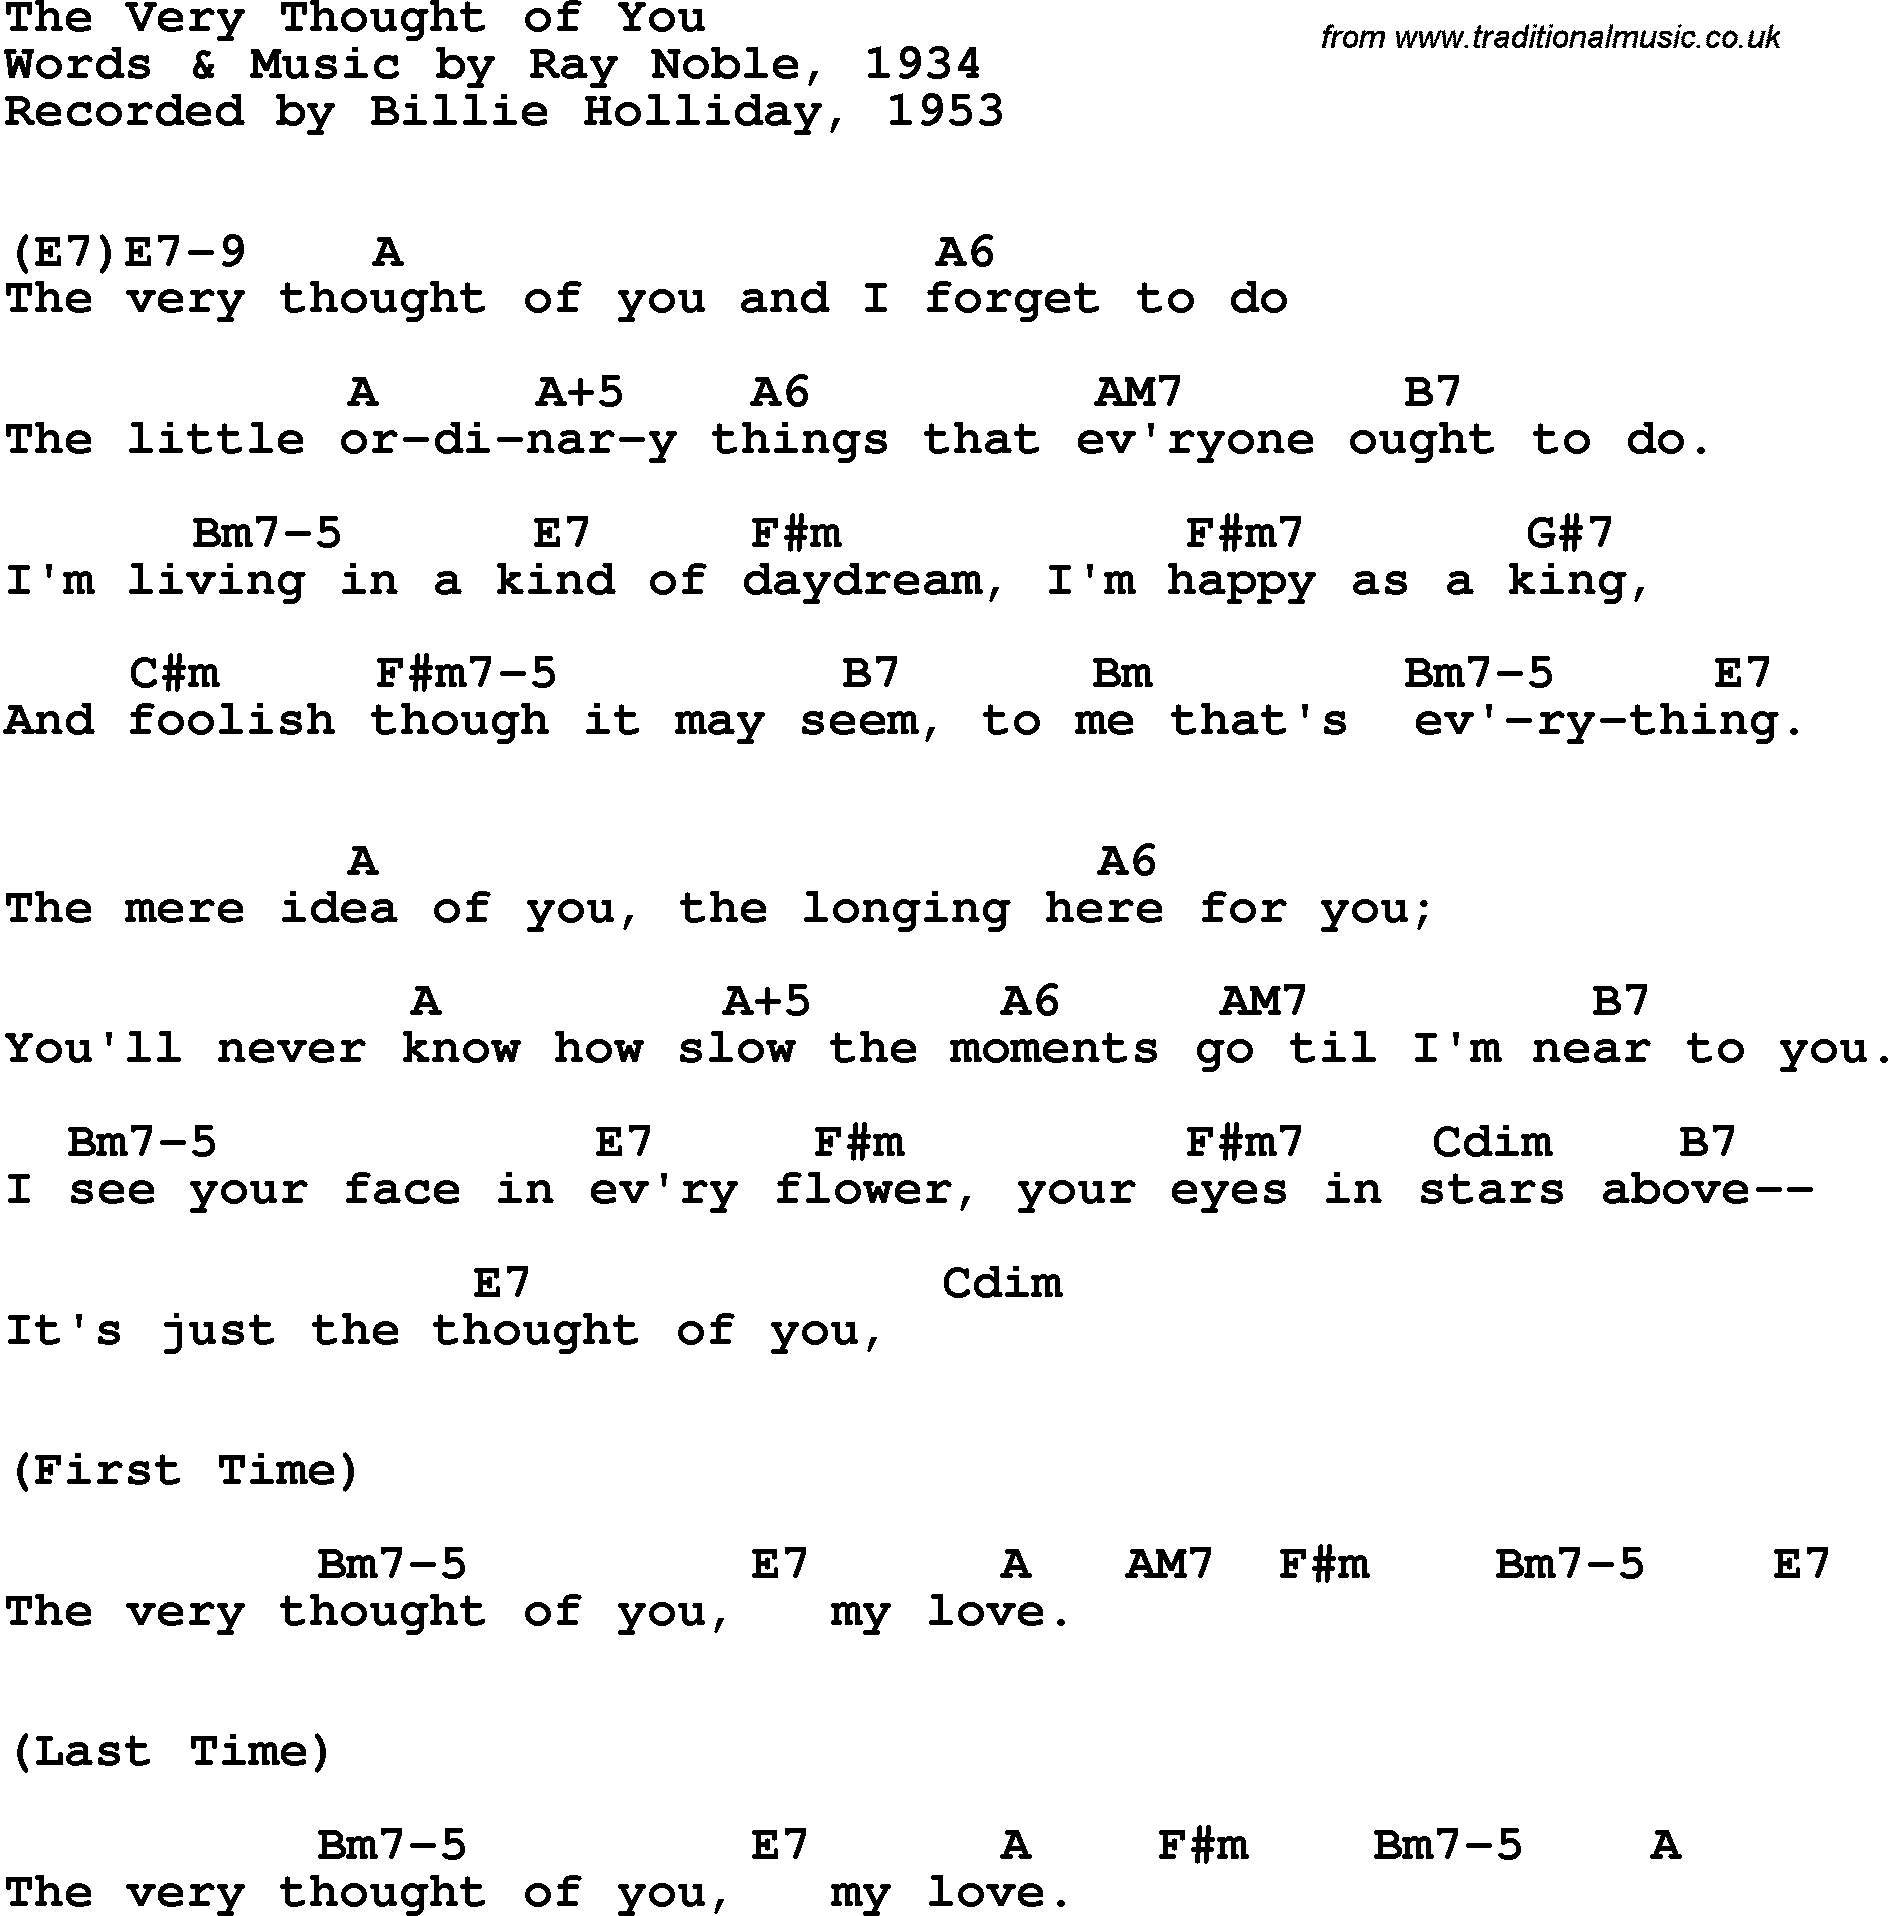 Song Lyrics with guitar chords for Very Thought Of You, The - Billie Holliday, 1953